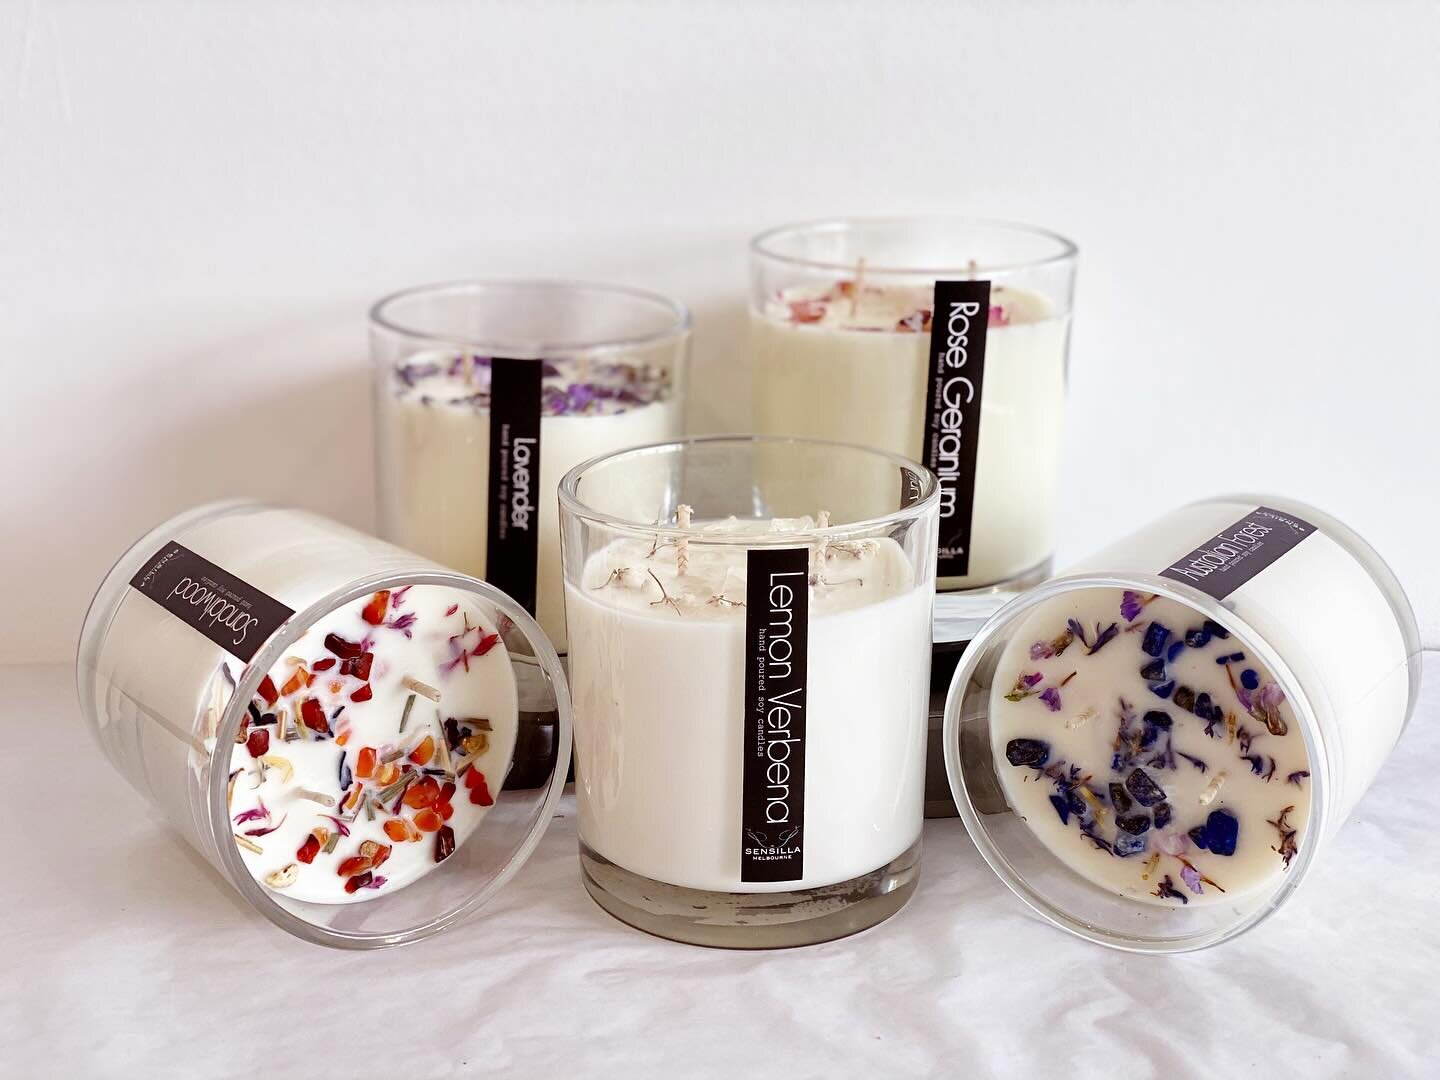 &ldquo;Illuminate your love with these enchanting and divine smelling candles. Each flame whispers sweet moments, casting a warm glow on your special day. A perfect gift to light up your romance. 💖🕯️
.
.
#flowersbykathleenkelly #flowersbykk #valent